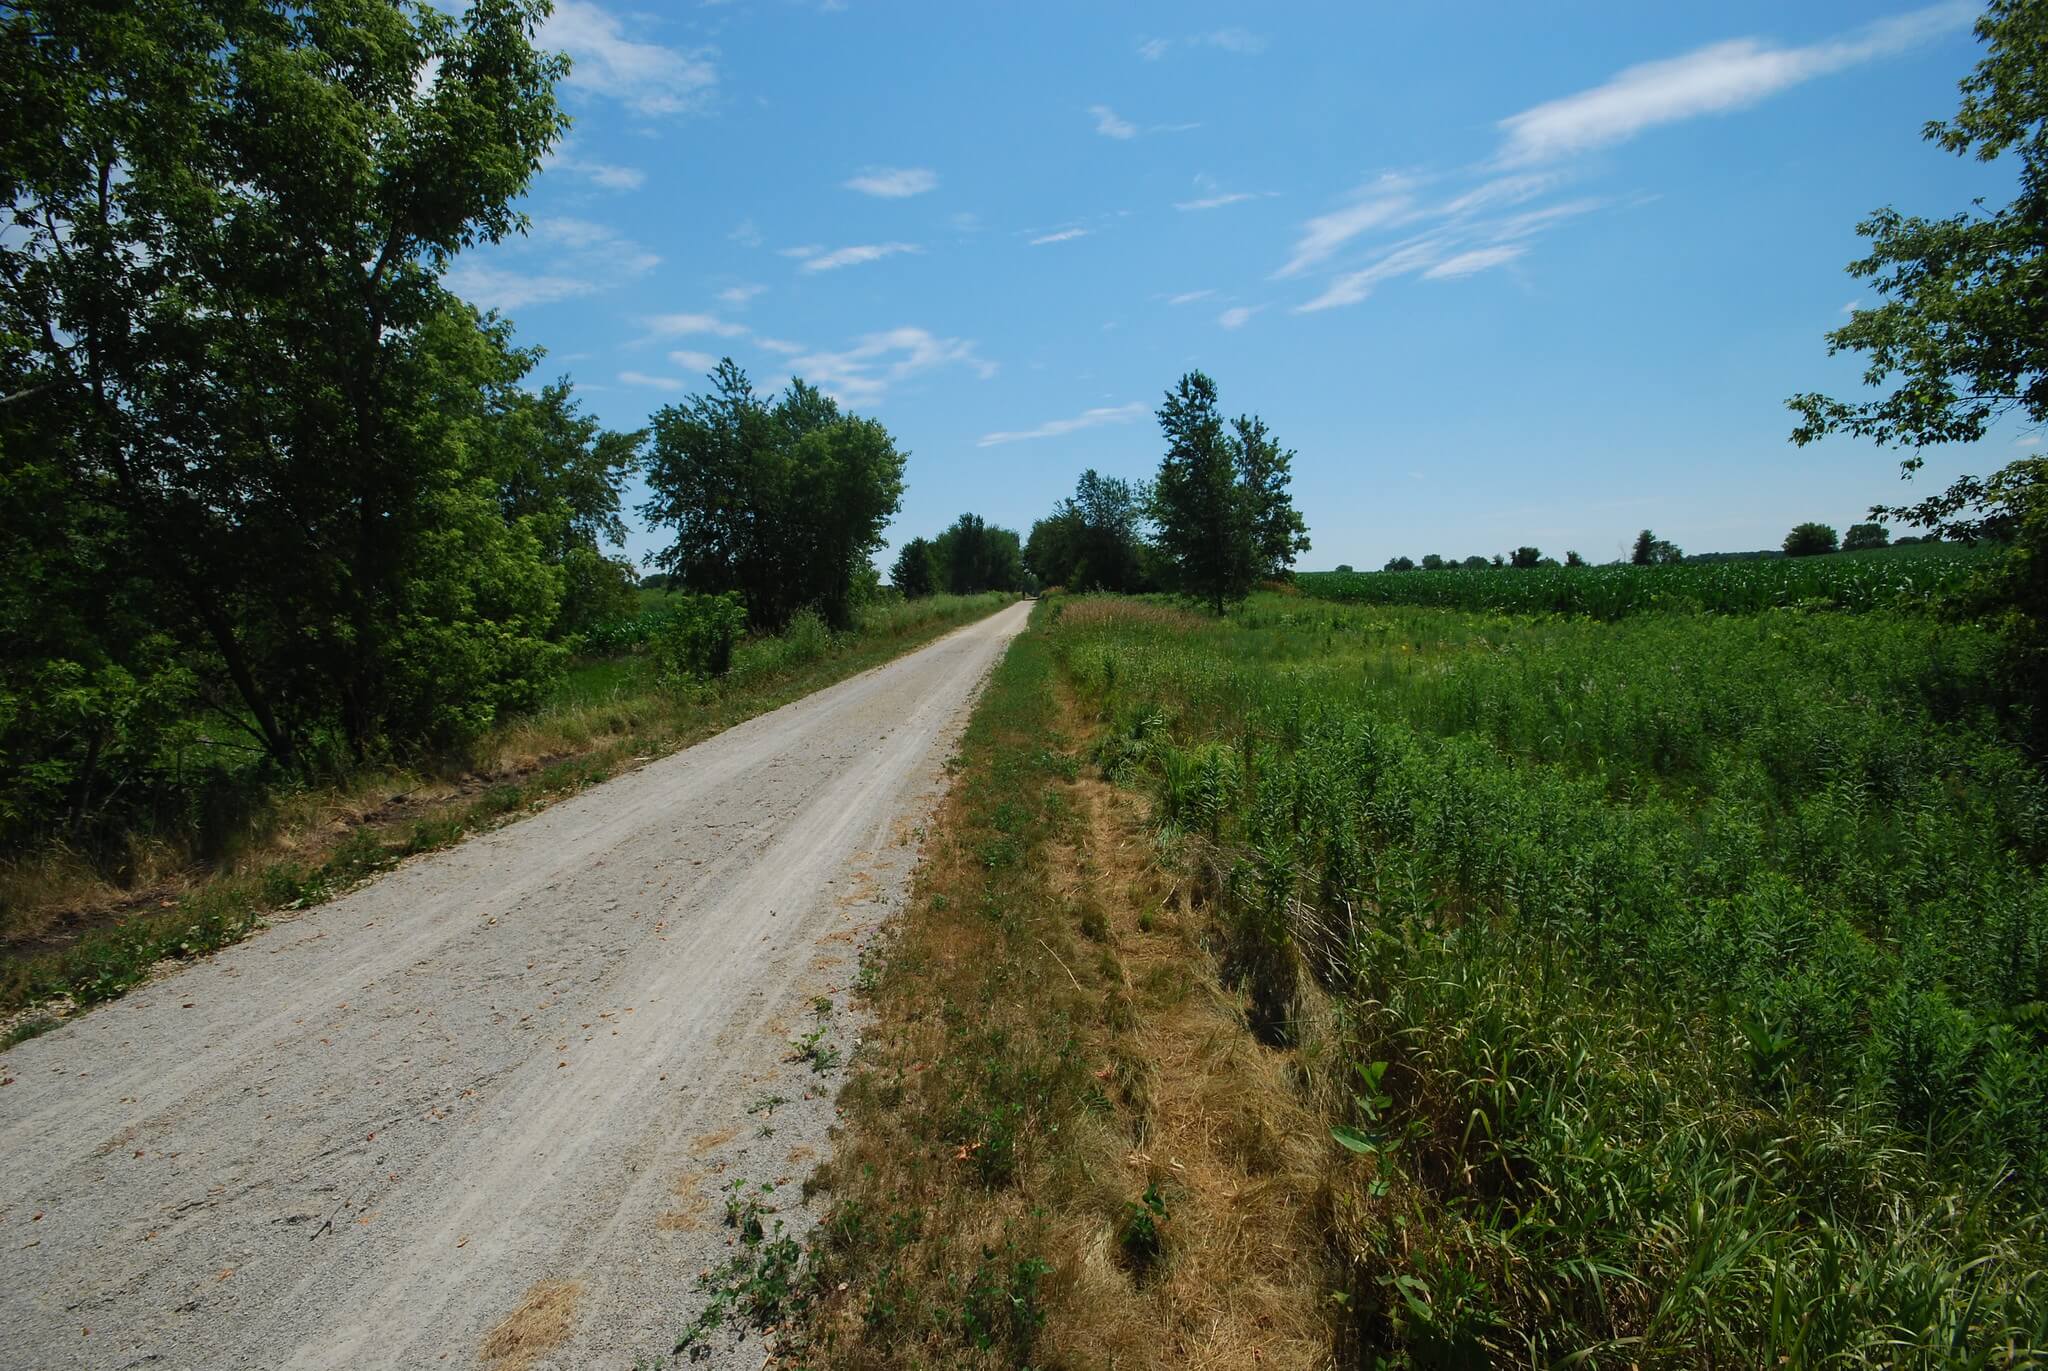 Flat gravel trail with bushes and grass on both sides and a blue sky with wispy white clouds during summer.